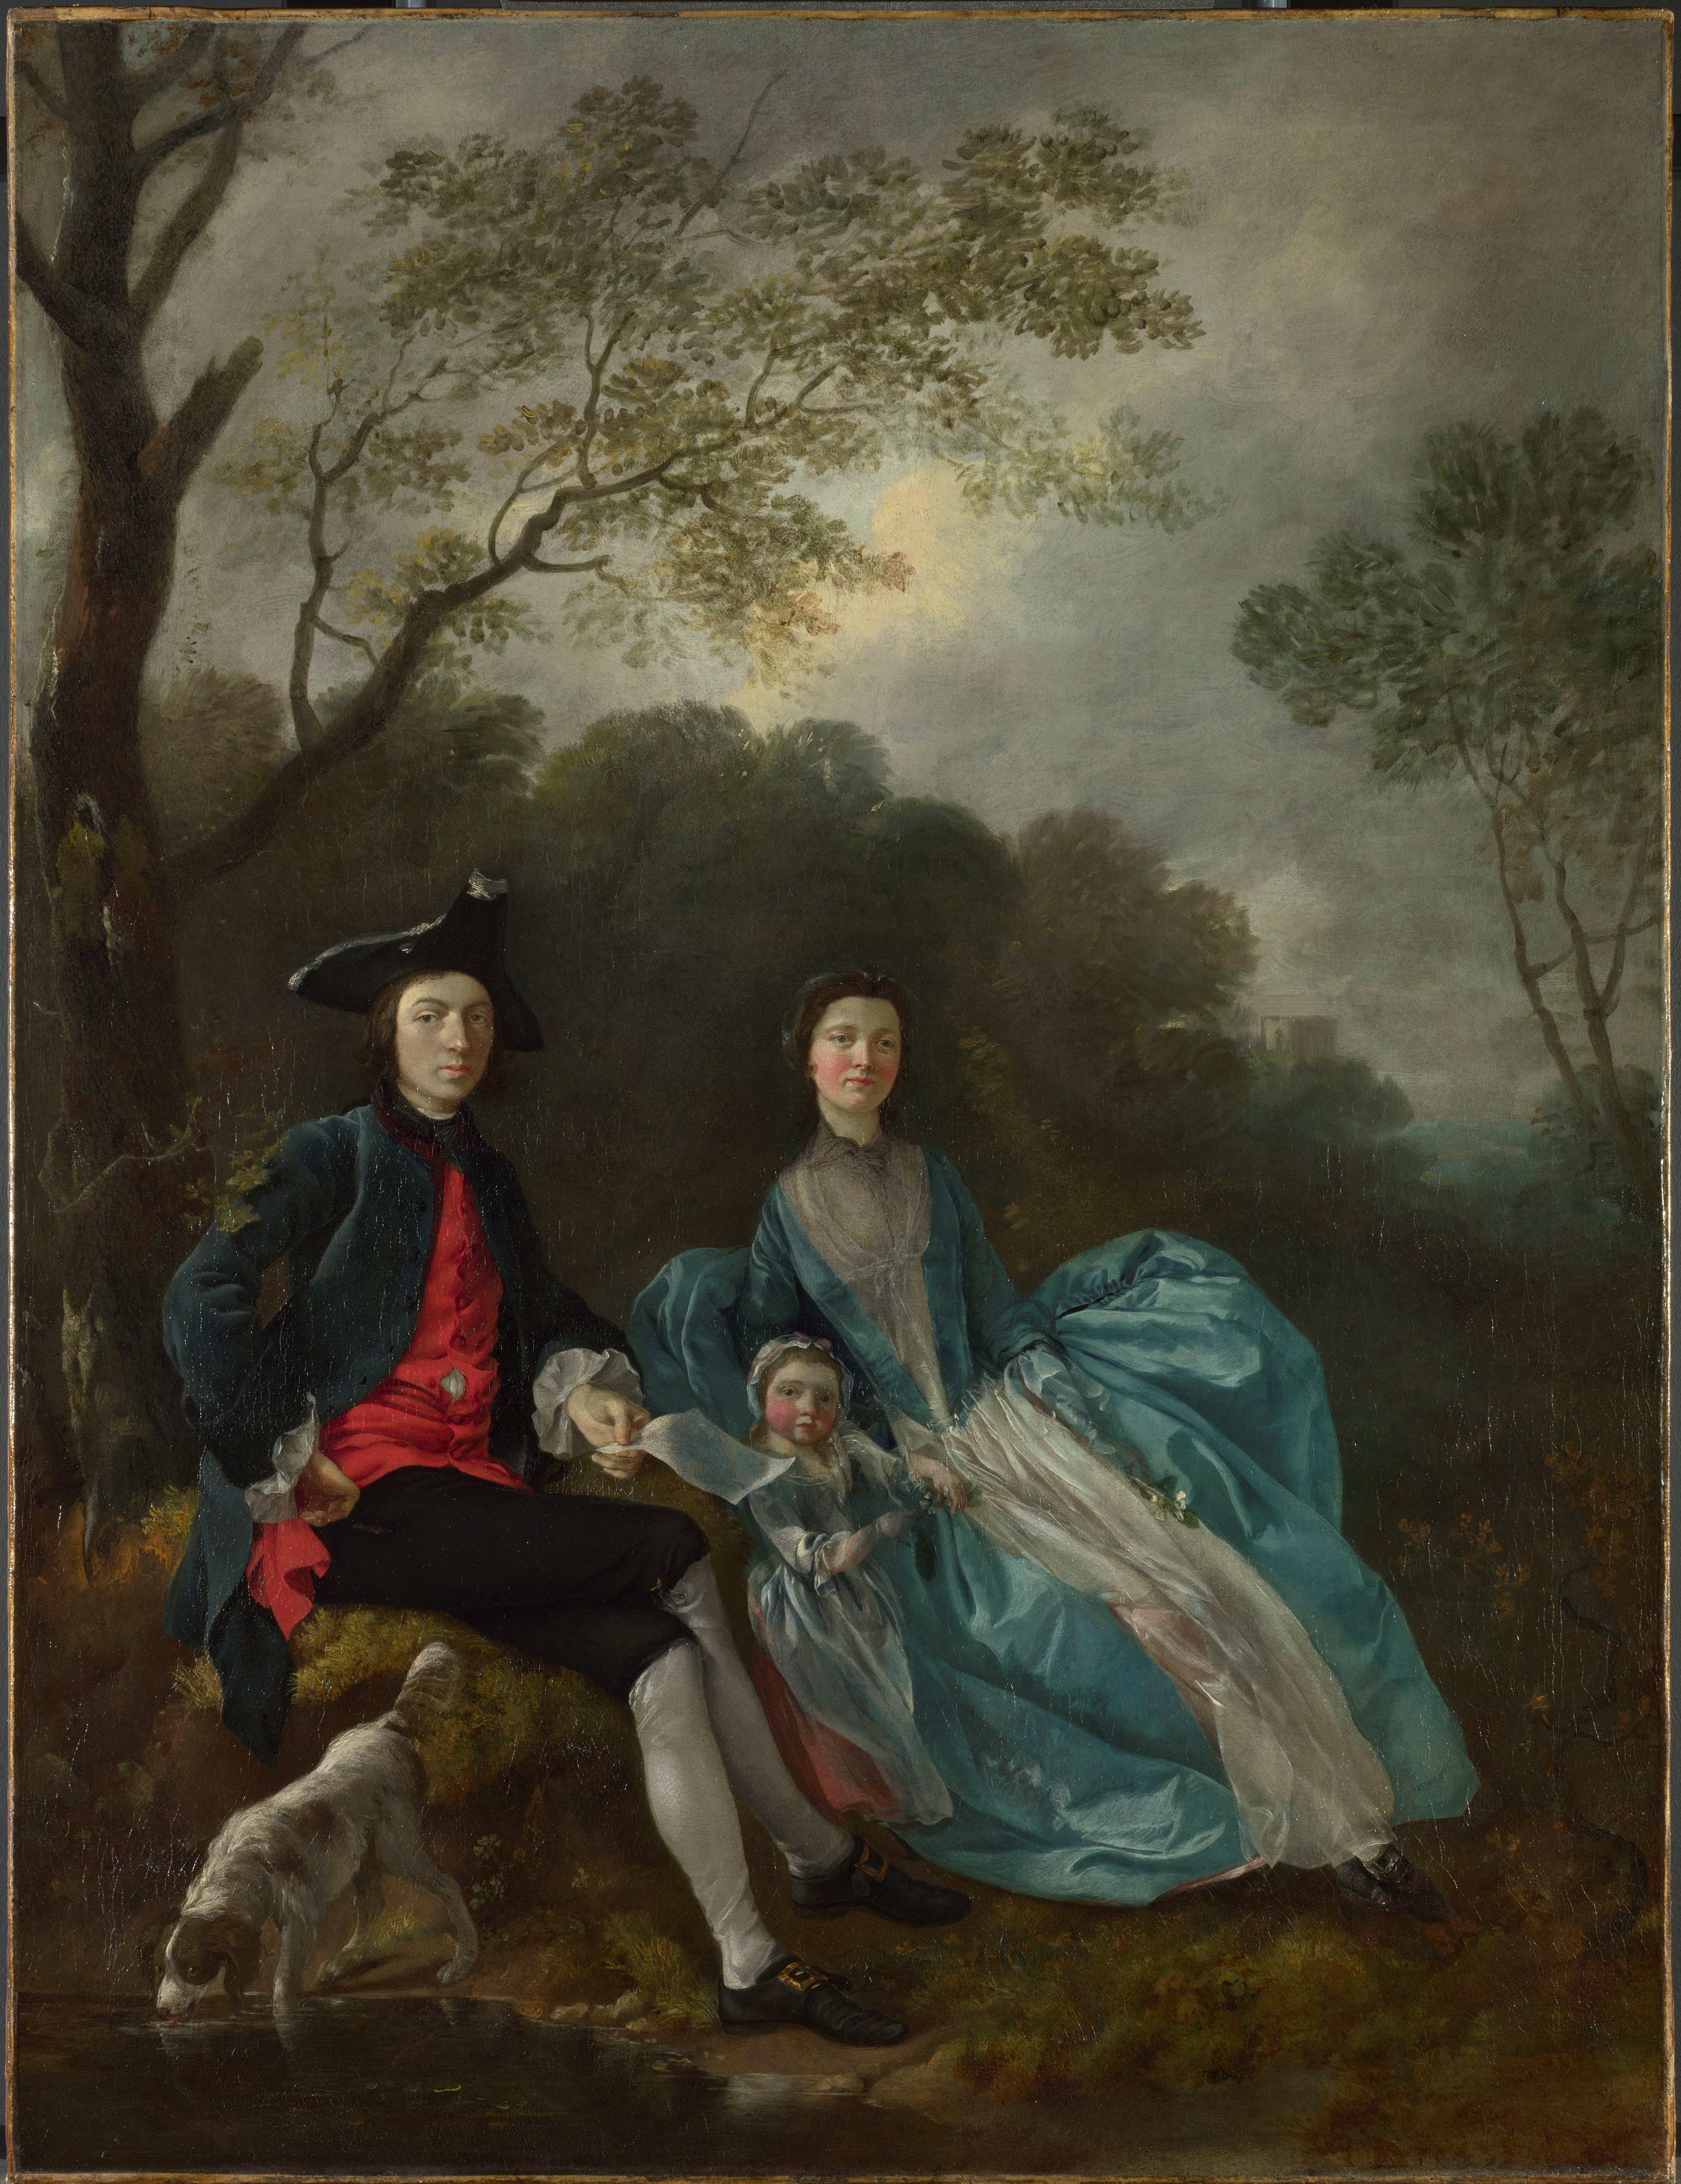 The Artist With His Wife And Daughter, Thomas Gainsborough (The National Gallery, London)